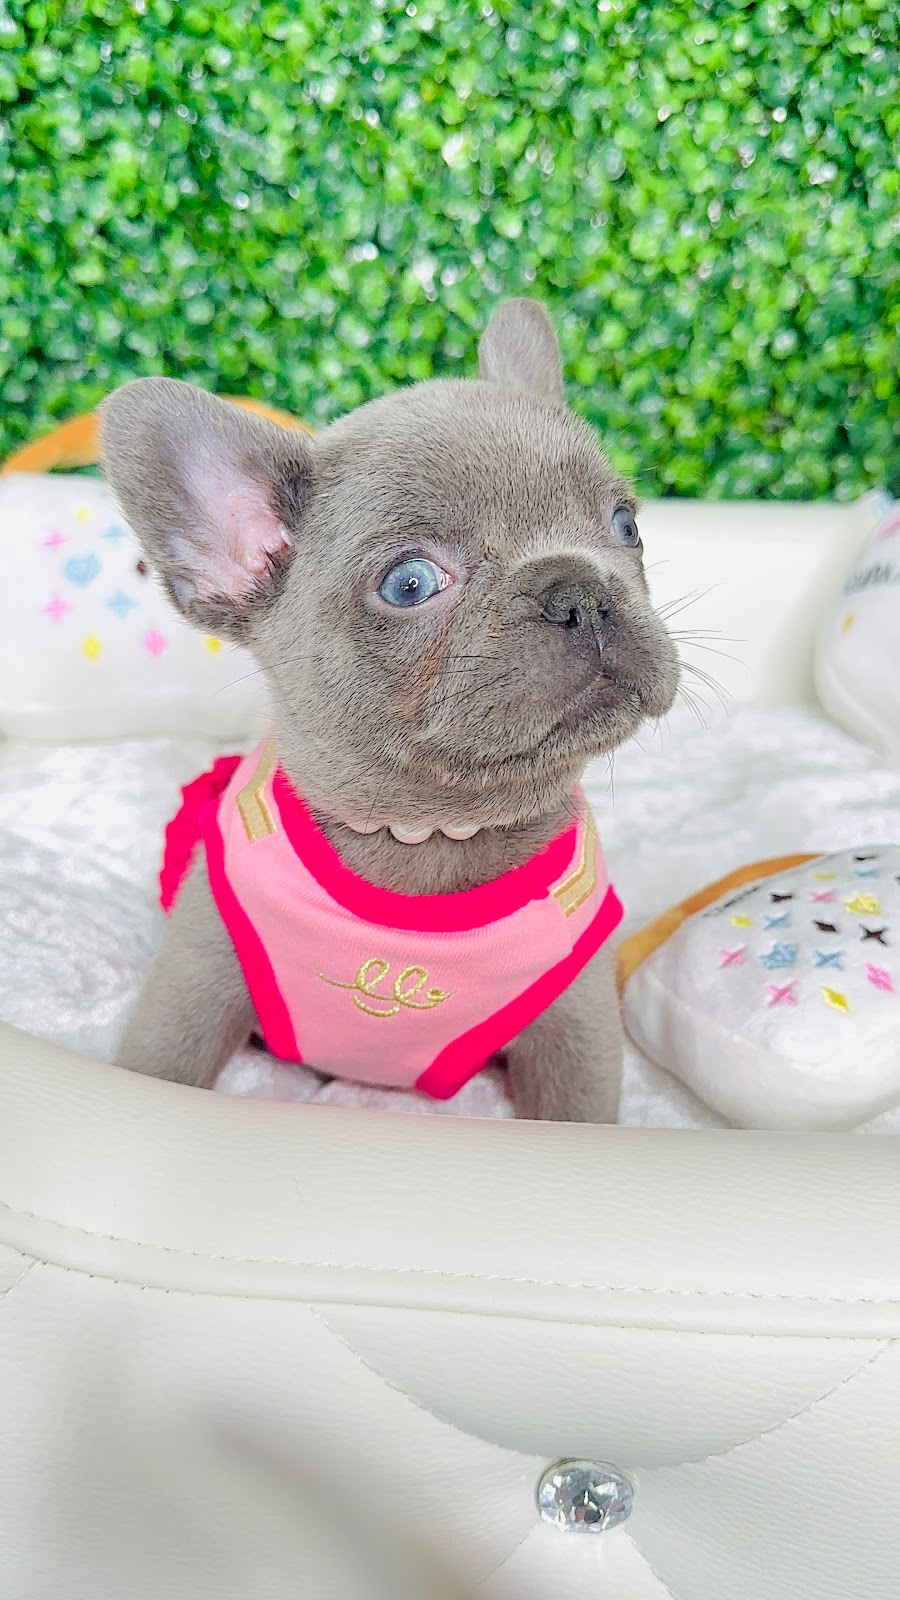 Tiny Paws Teacup & Toy Puppy Boutique | 18545 W Dixie Hwy, Aventura, FL 33180 | Phone: (305) 934-7889